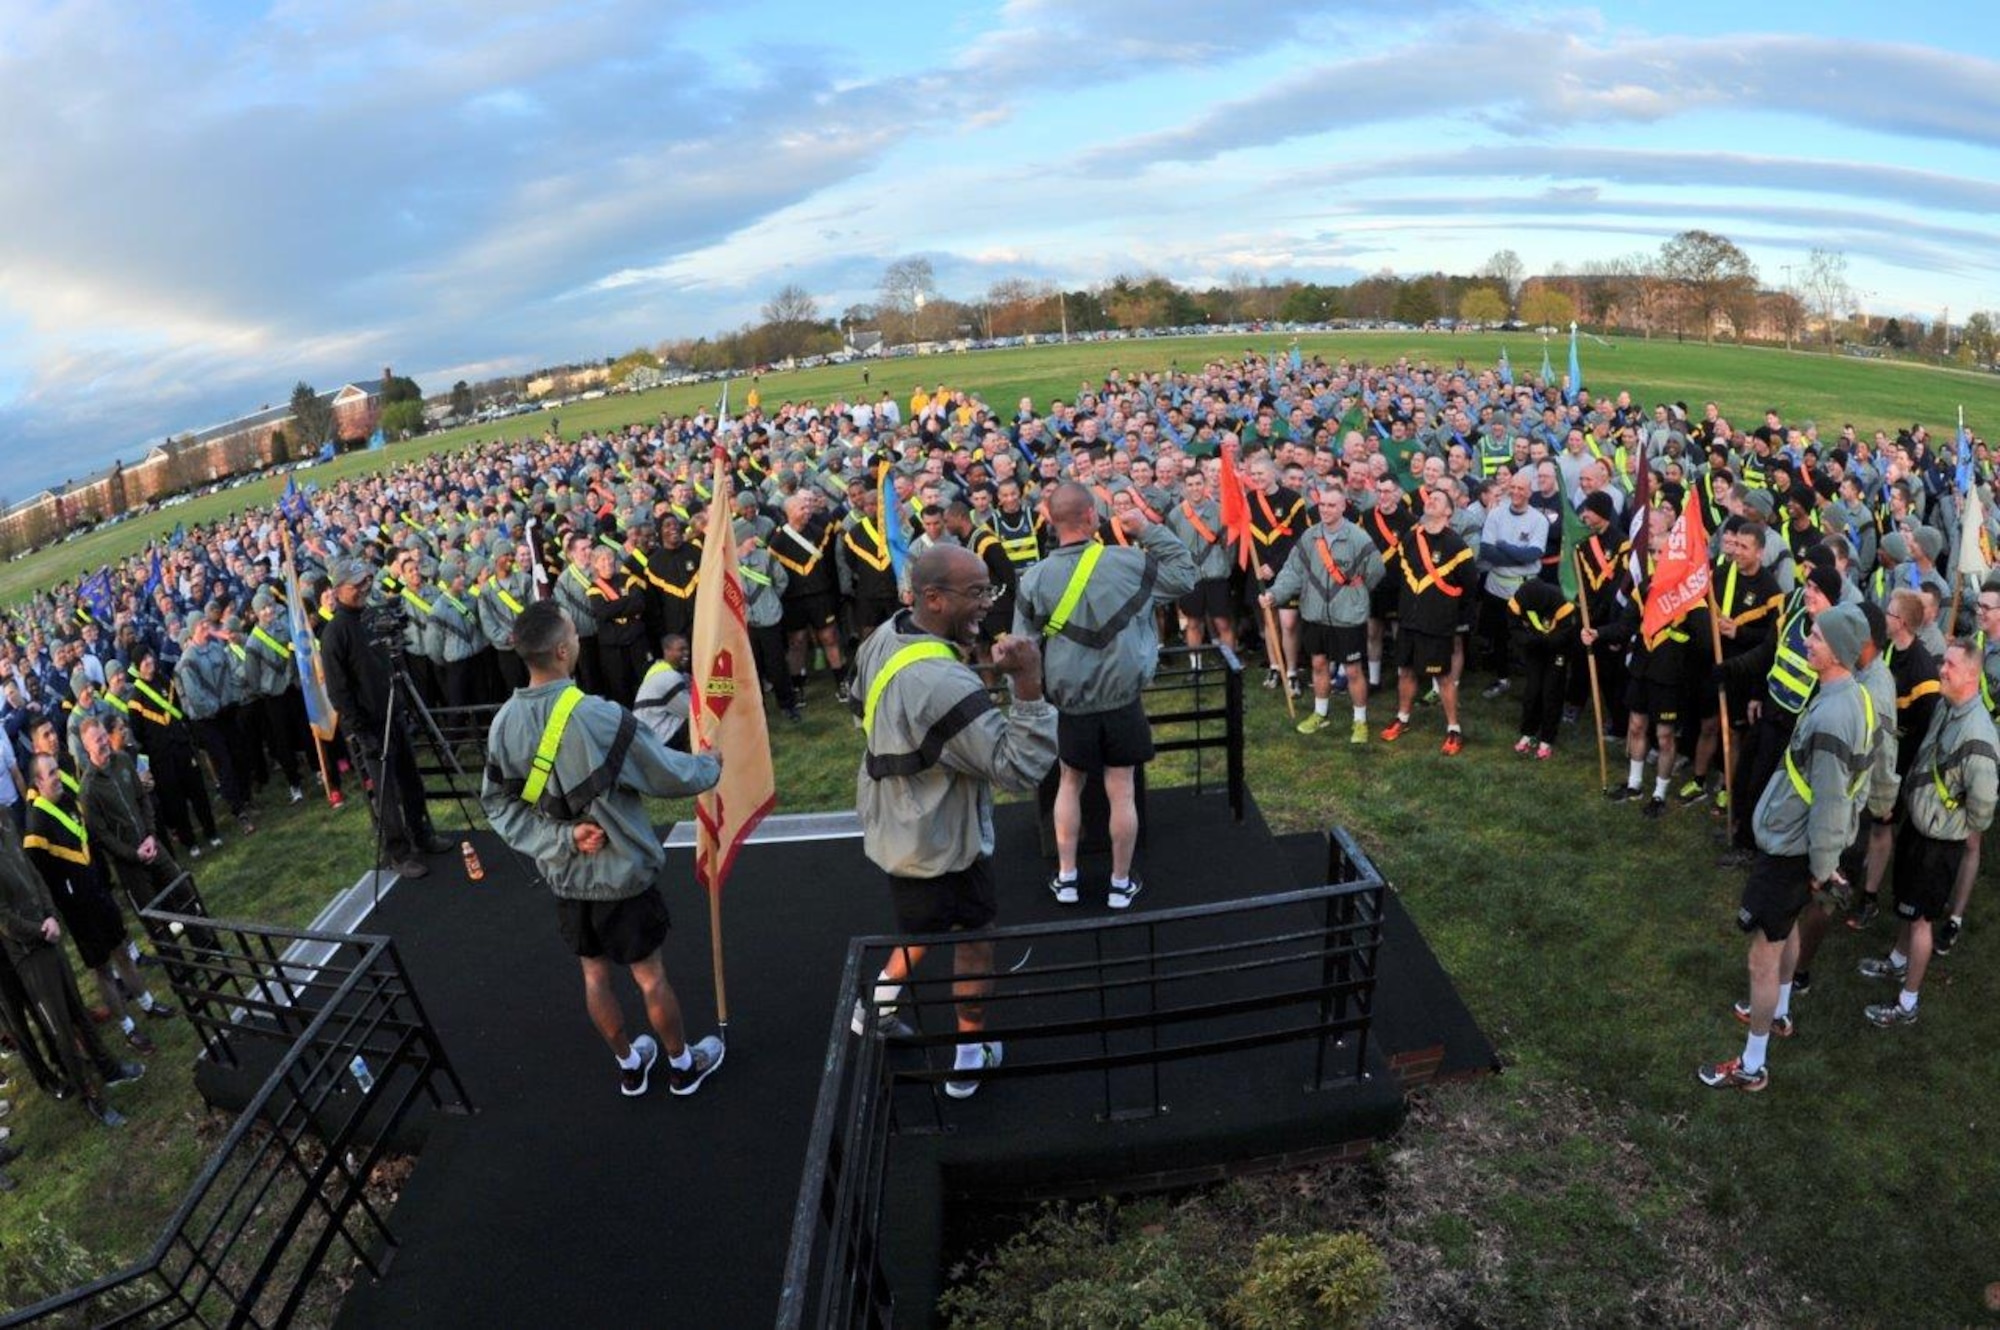 Garrison Commander, Colonel Brian Foley, gives his final remarks at the end of the 2016 Sexual Assault, Awareness and Prevention Month garrison run April 8, 2016 at Fort George G. Meade, Md. There were over 1,900 joint service members participating in the SAAPM event. (U.S. Air Force photo/Staff Sgt. Alexandre Montes)